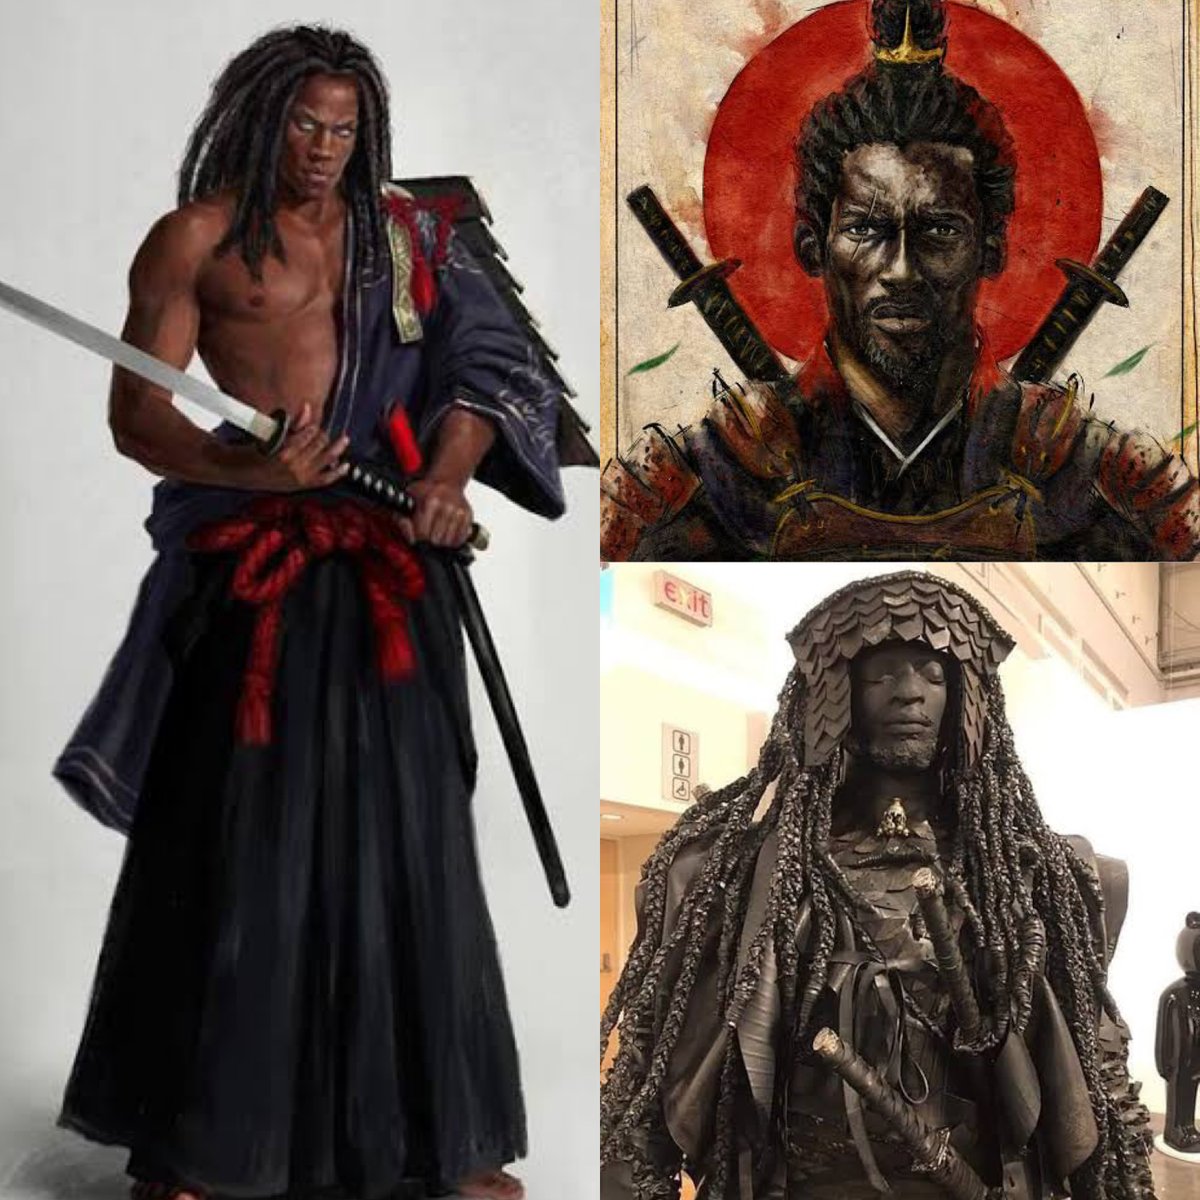 Yasuke was the world’s first Black samurai.

When a 6-foot-tall African slave landed in Japan, he stuck out like a sore thumb. People lost all modesty and nearly caused a stampede trying to get a closer look. Such a sight was so foreign in Kyoto.

A THREAD!